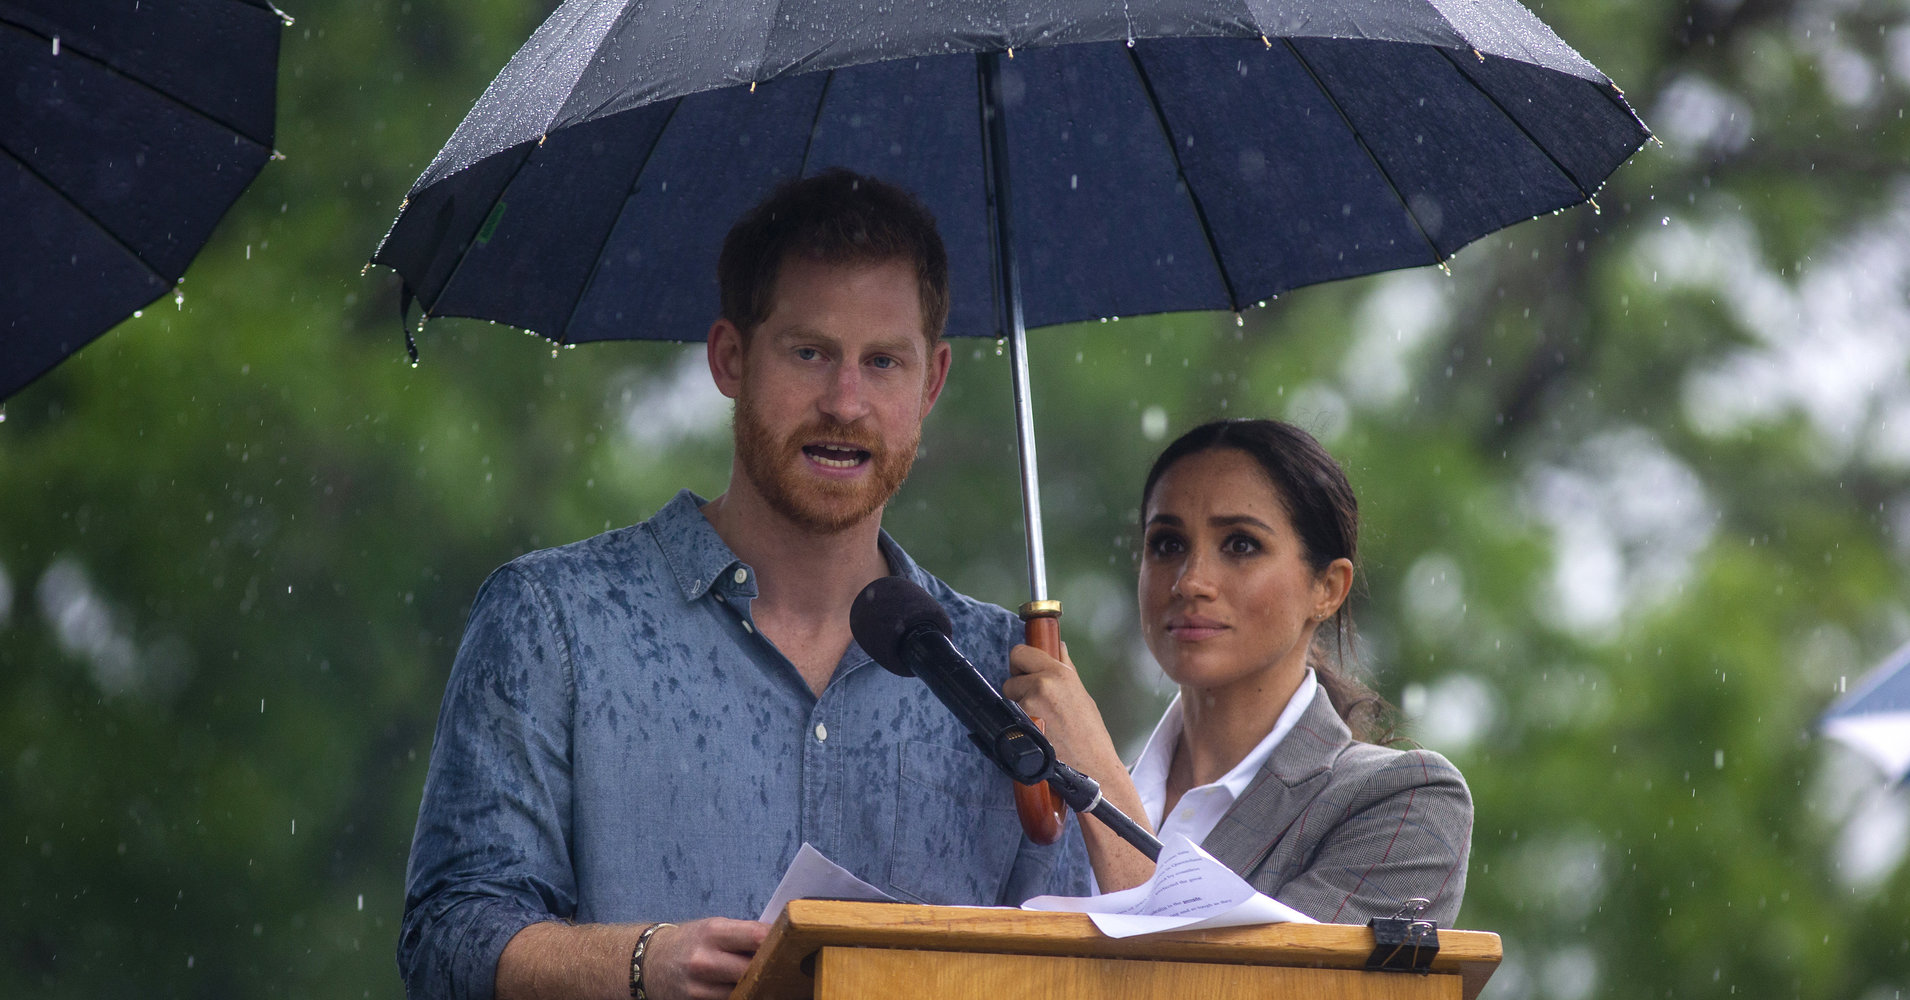 Britain's Prince Harry and Meghan, Duchess of Sussex attend a community picnic at Victoria Park in Dubbo, Australia, Wednesday, Oct. 17, 2018. Prince Harry and his wife Meghan are on day two of their 16-day tour of Australia and the South Pacific. (Ian Vogler/Pool via AP)